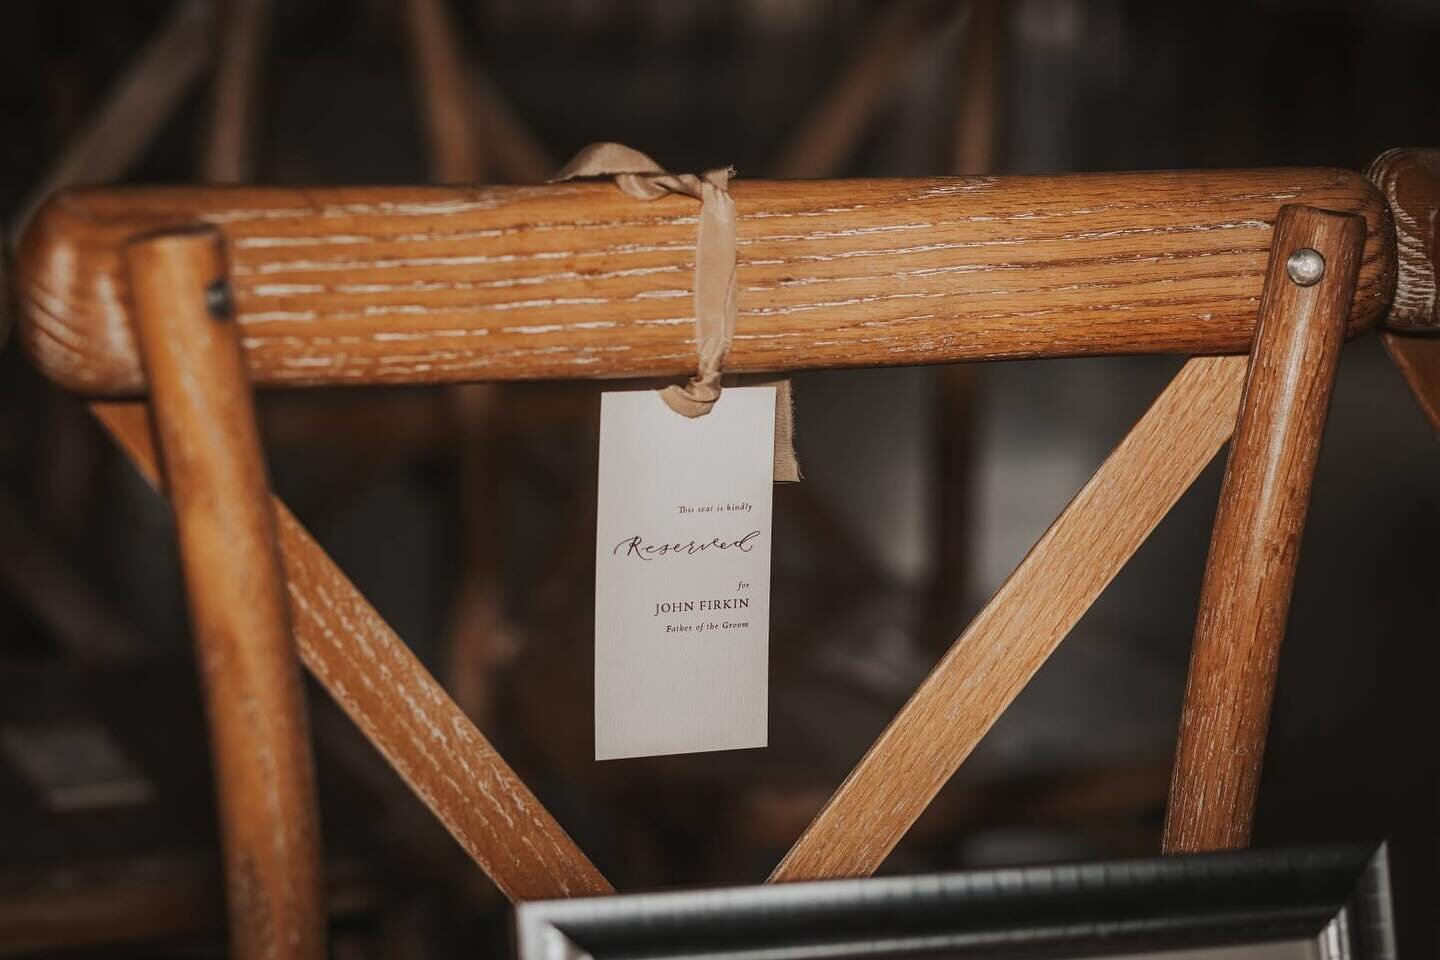 Ceremony reserved tags with silk ribbon for Charlotte ✨ 

Photograph by @love_and_bloom_ 

#reservedtags #weddingreservedseating #reservedseating #reservedsign #reservedsigns #ceremonysign #ceremonysigns #weddingceremonysign #weddingceremonydecor #we